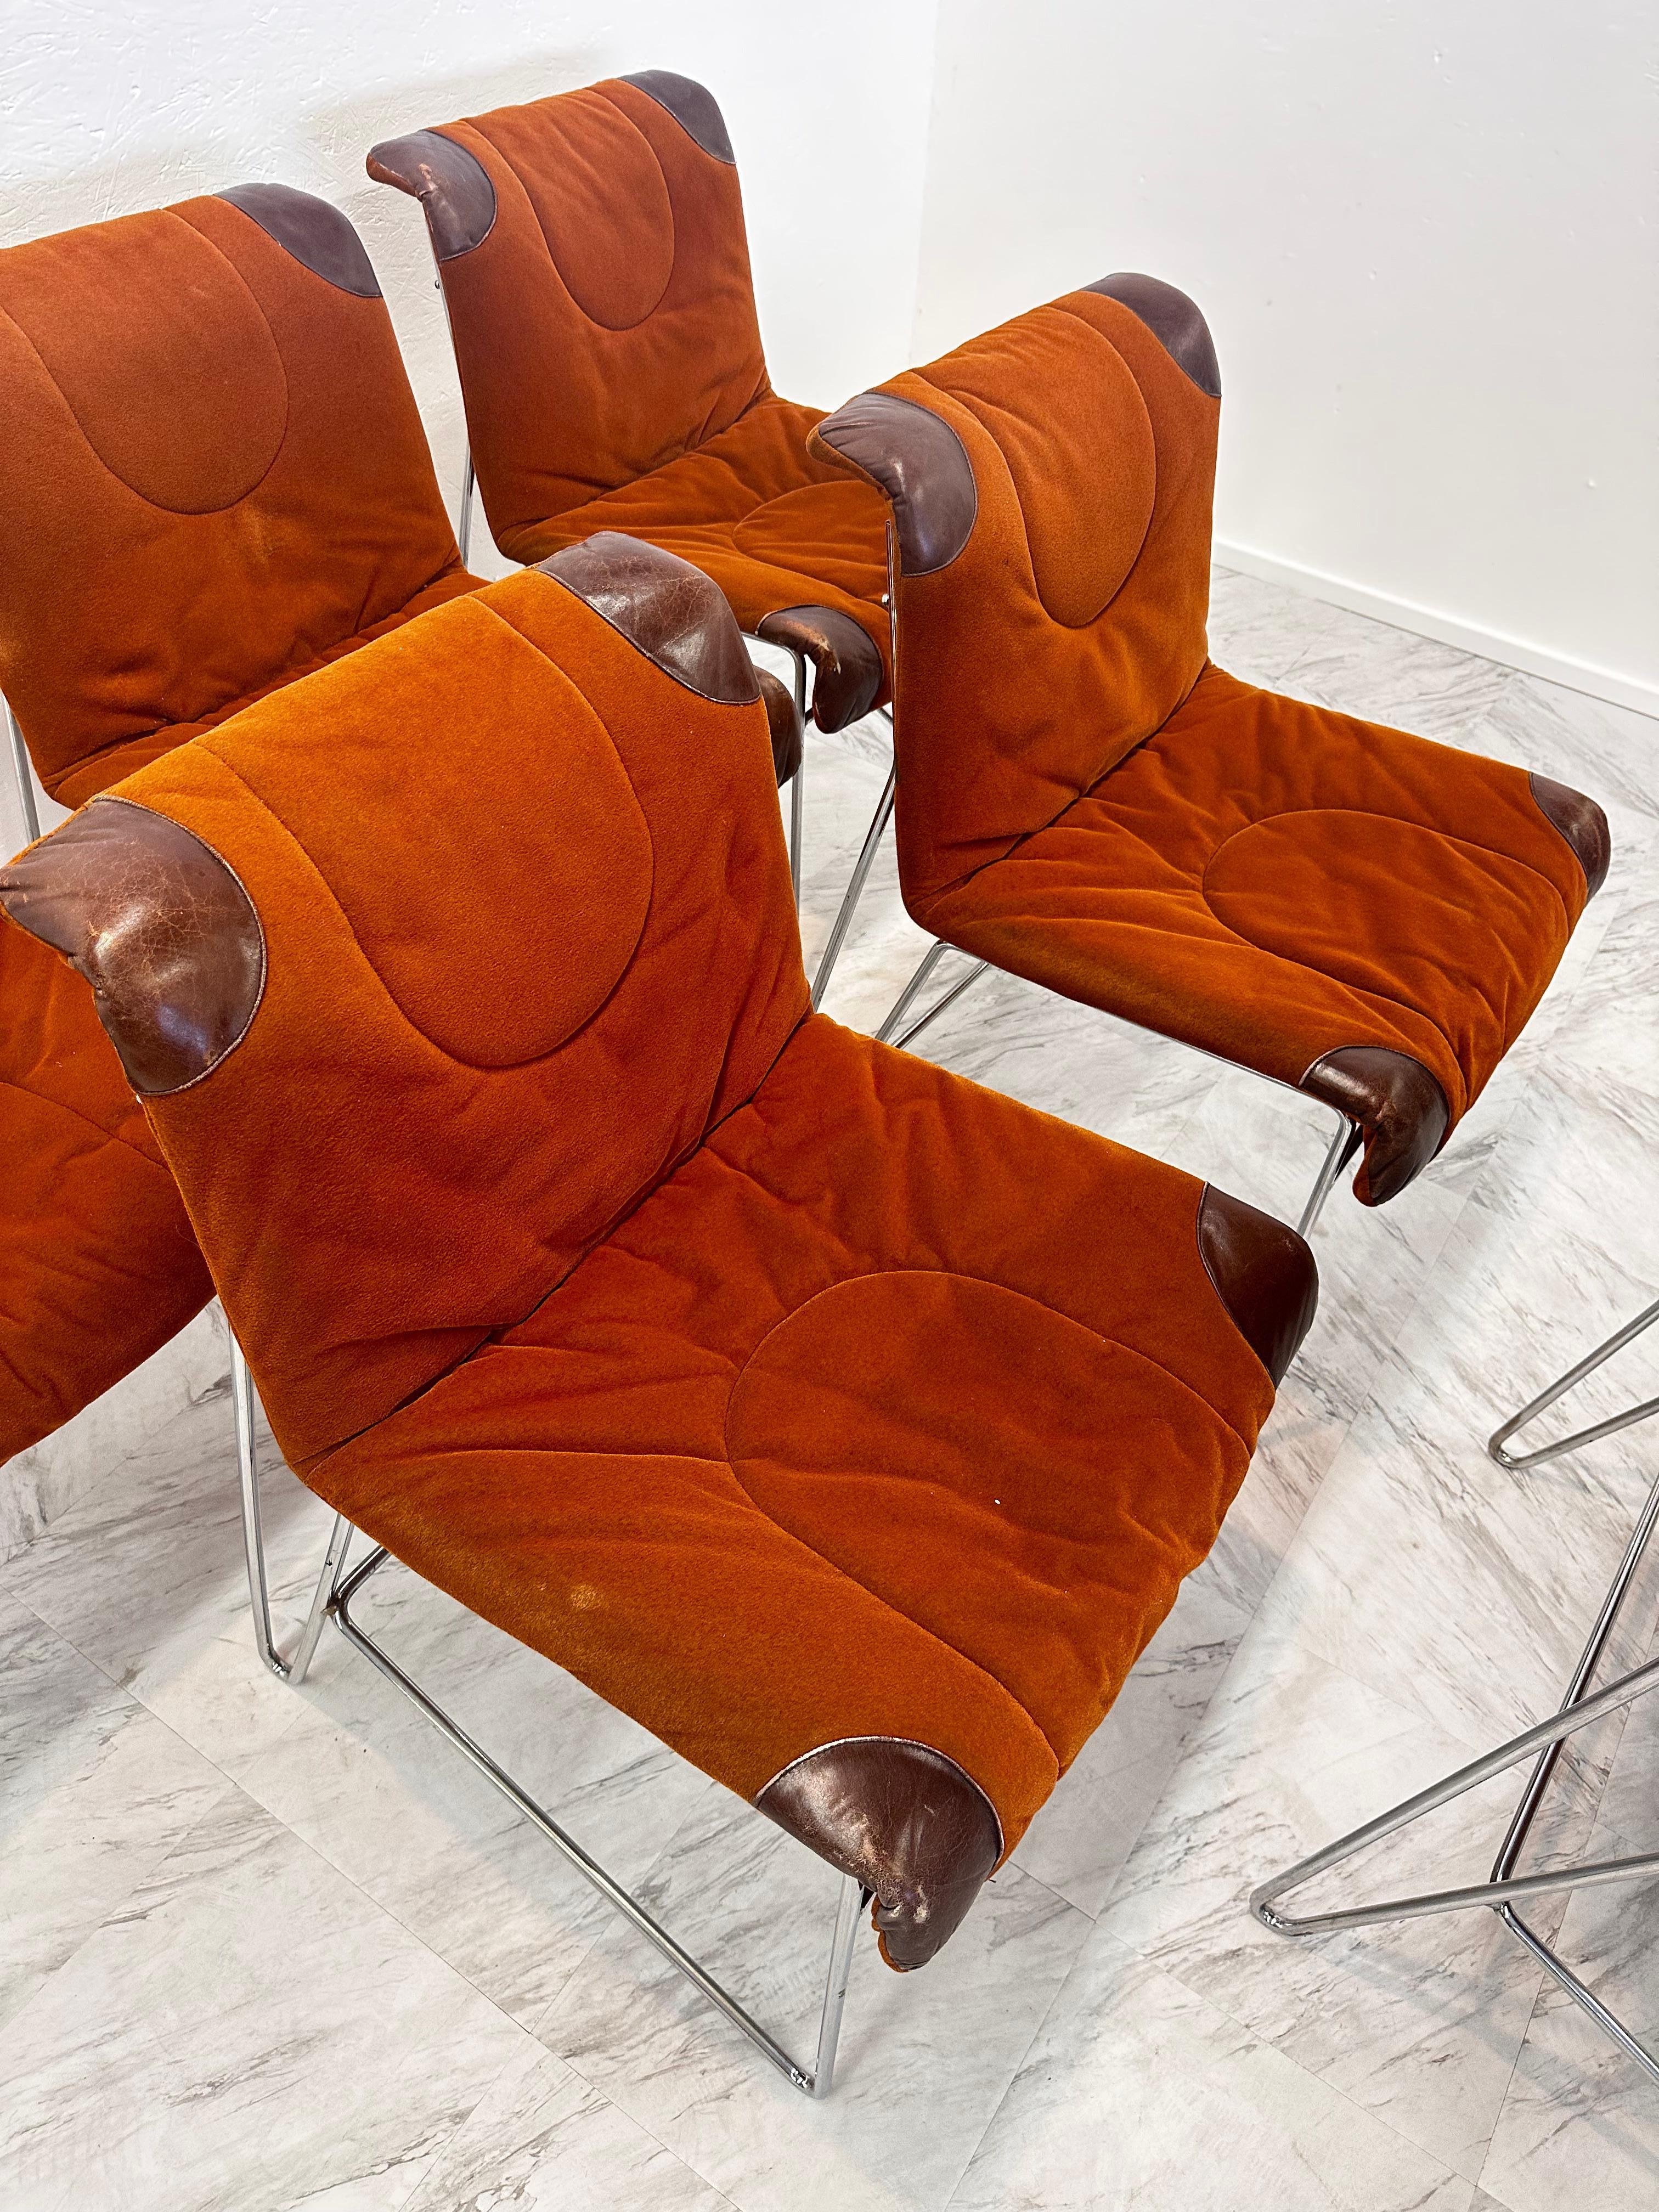 Set of 6 Mid-Century Modern Italian Orange Chairs by Guido Faleschini 1970s For Sale 1